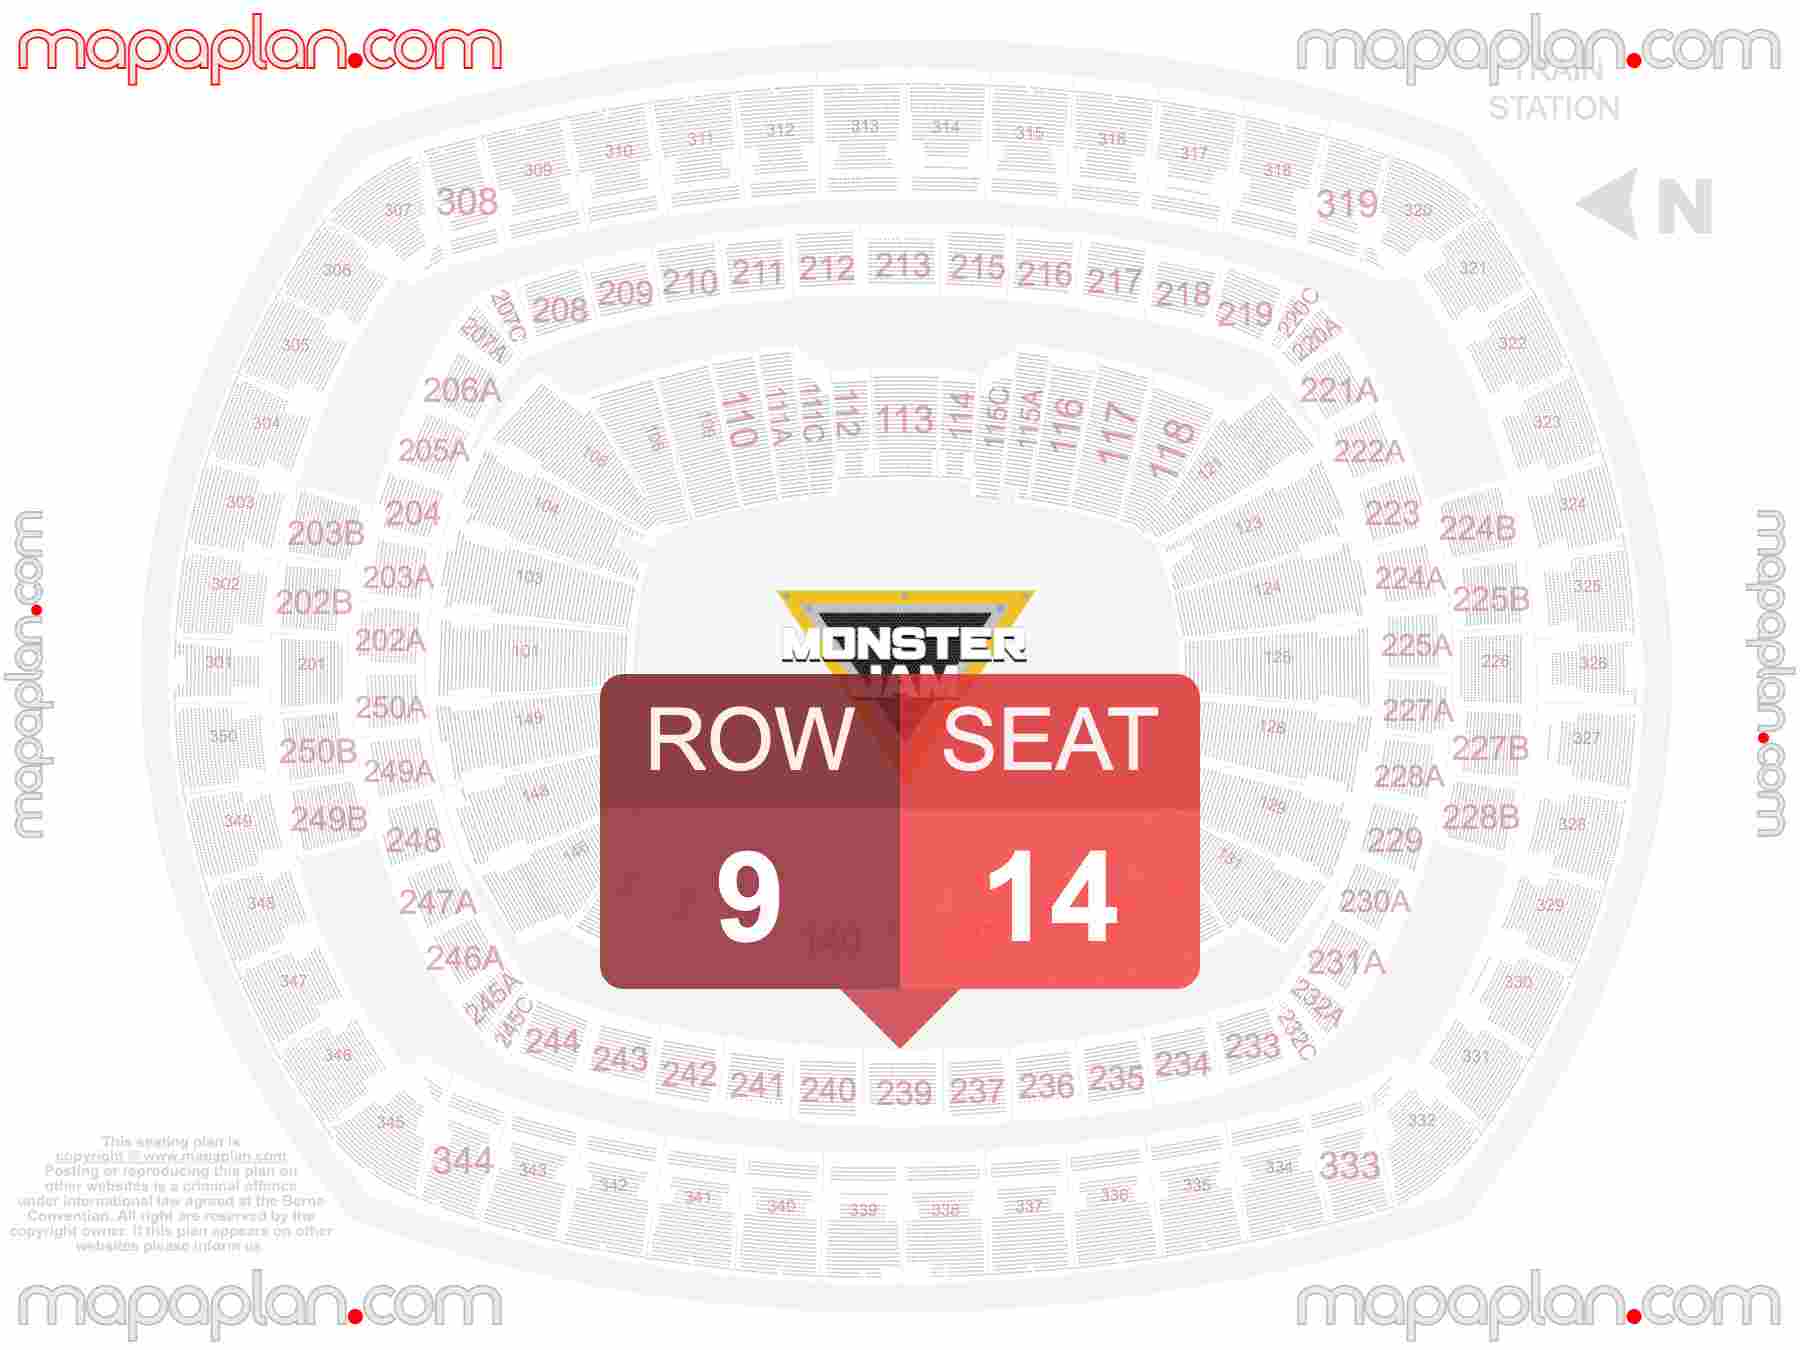 East Rutherford MetLife Stadium seating chart Monster Jam trucks detailed seating chart - 3d virtual seat numbers and row layout